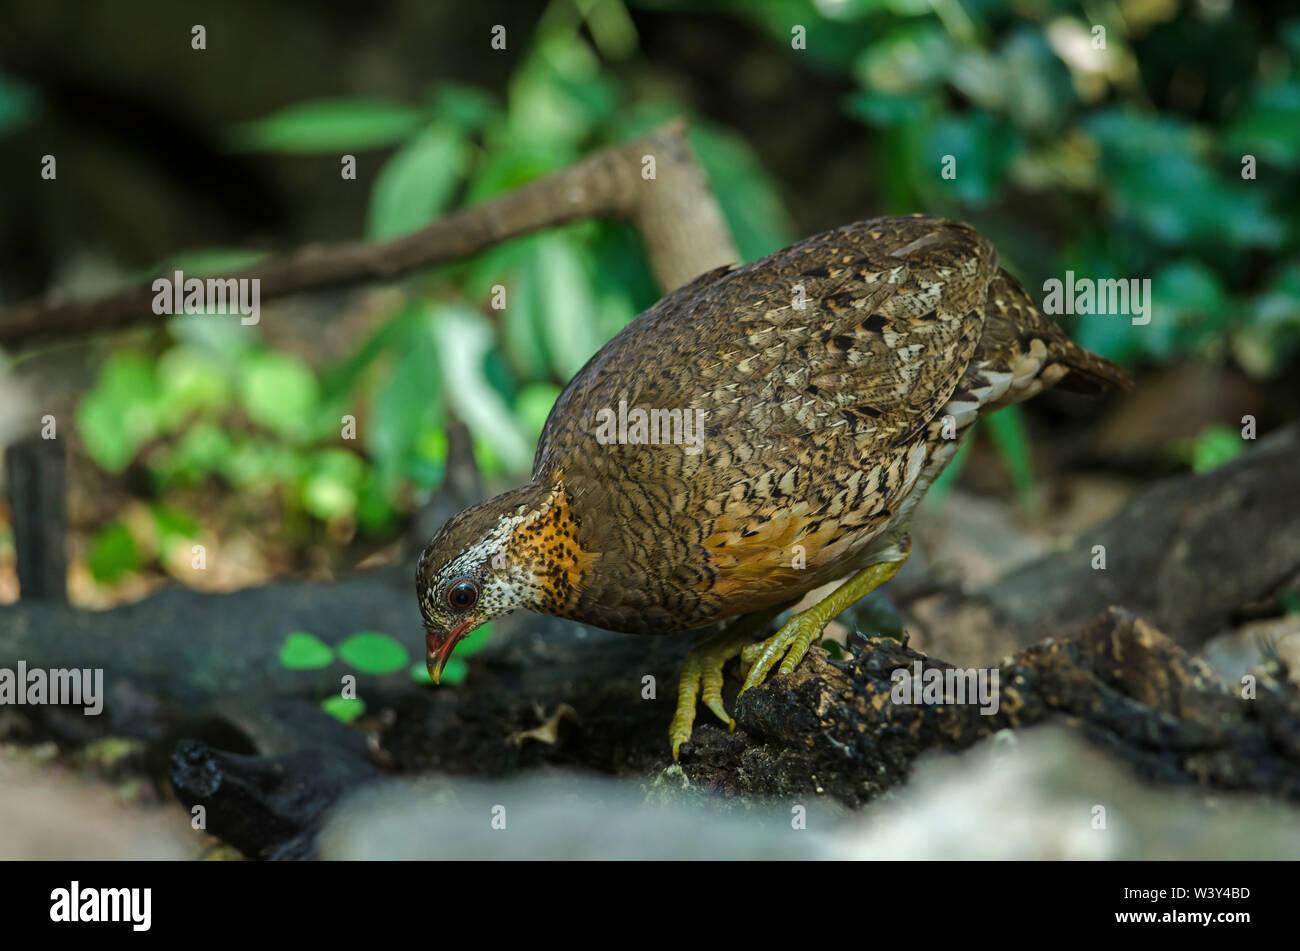 Green-legged partridge, Scaly-breasted partridge, Green-legged hill in nature, Thailand Stock Photo